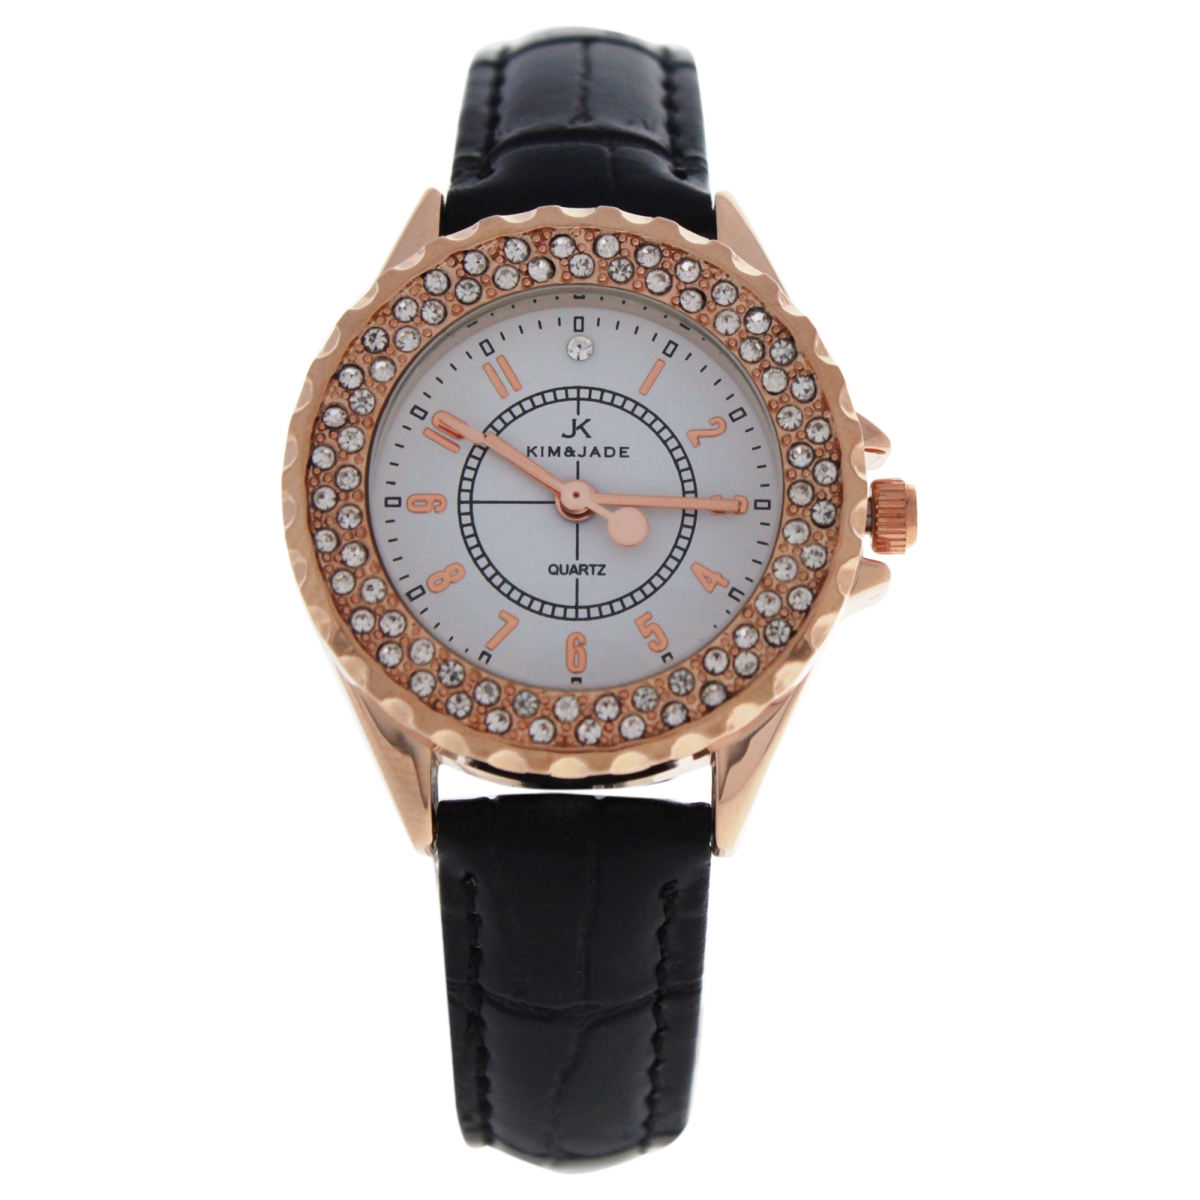 Picture of Kim & Jade W-WAT-1411 Rose Gold & Black Leather Strap Watch for Women - 2033L-GPBLW